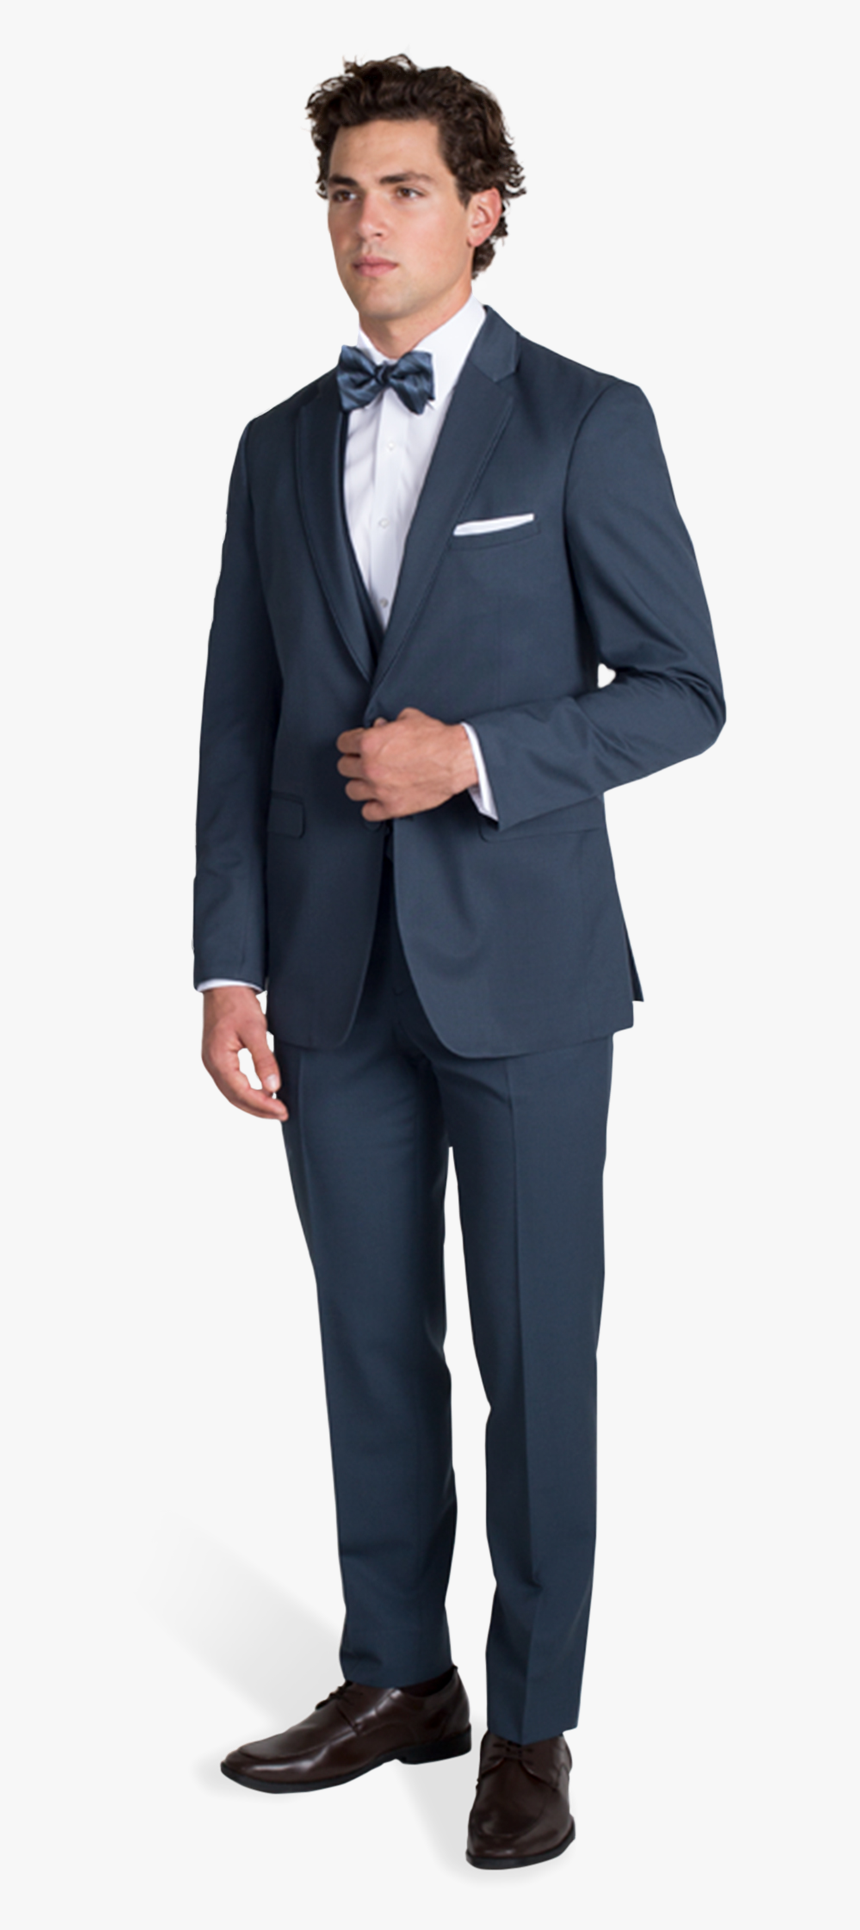 Slate Blue Notch Lapel Suit - Navy Blue Checkered Suit, HD Png Download, Free Download